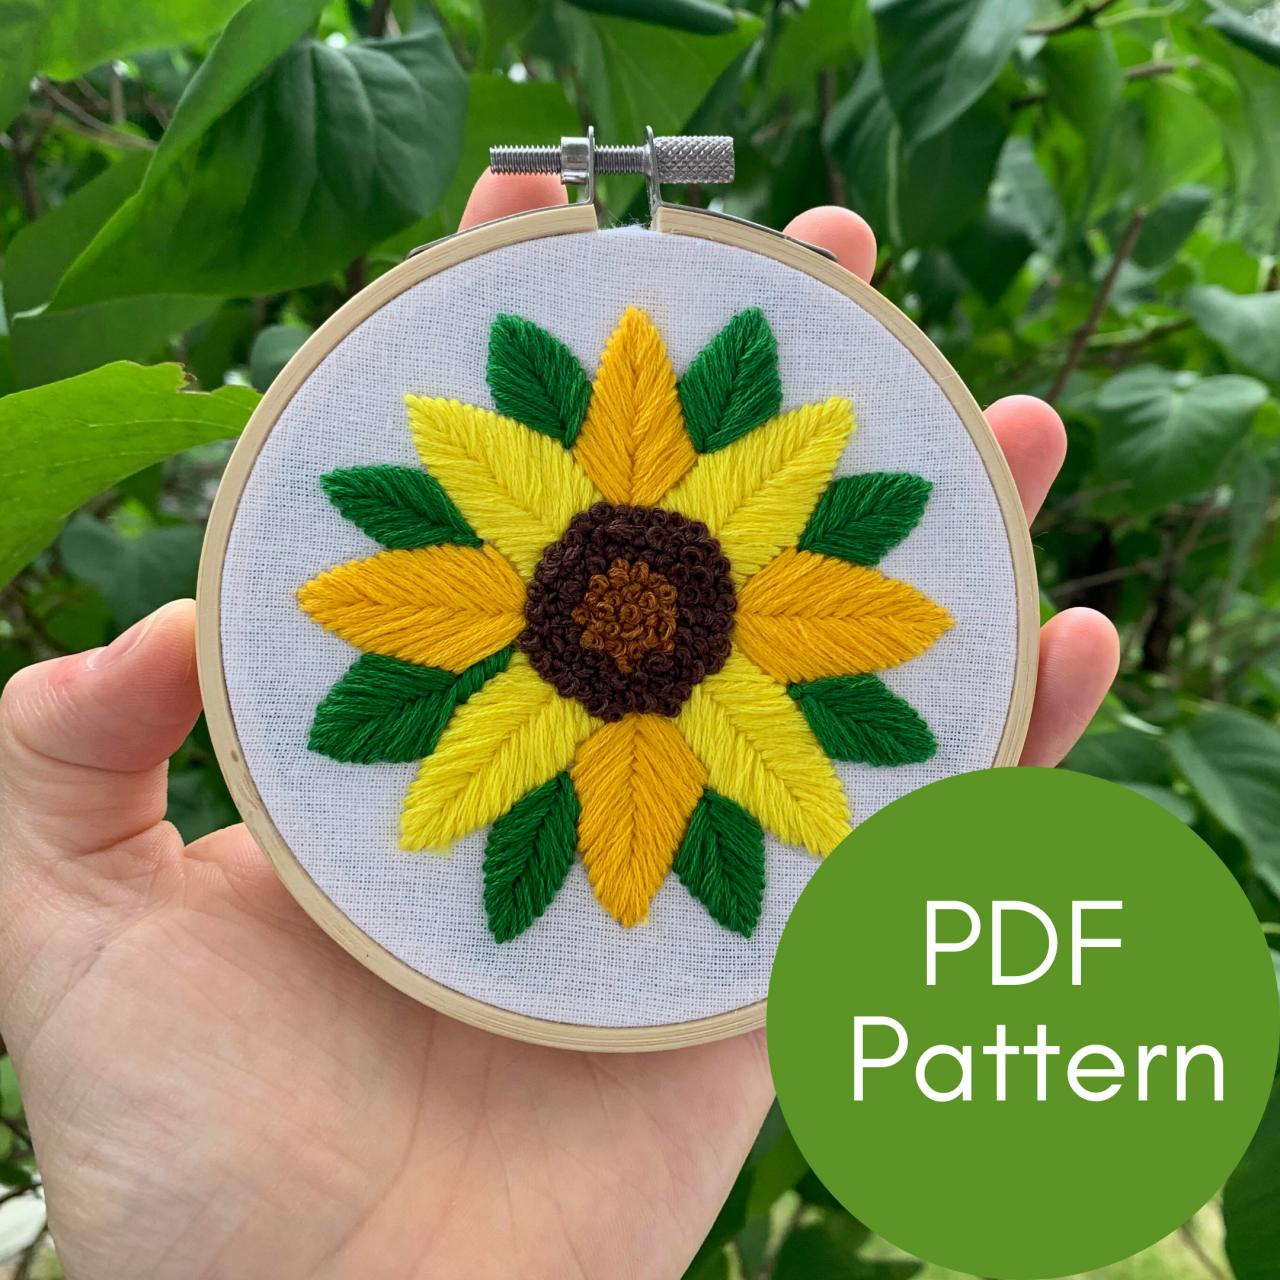 Sunflower Embroidery Pattern | PDF Digital Download | Modern Embroidery Pattern | Instant Download | Flower Pattern | DIY Embroidery Guide